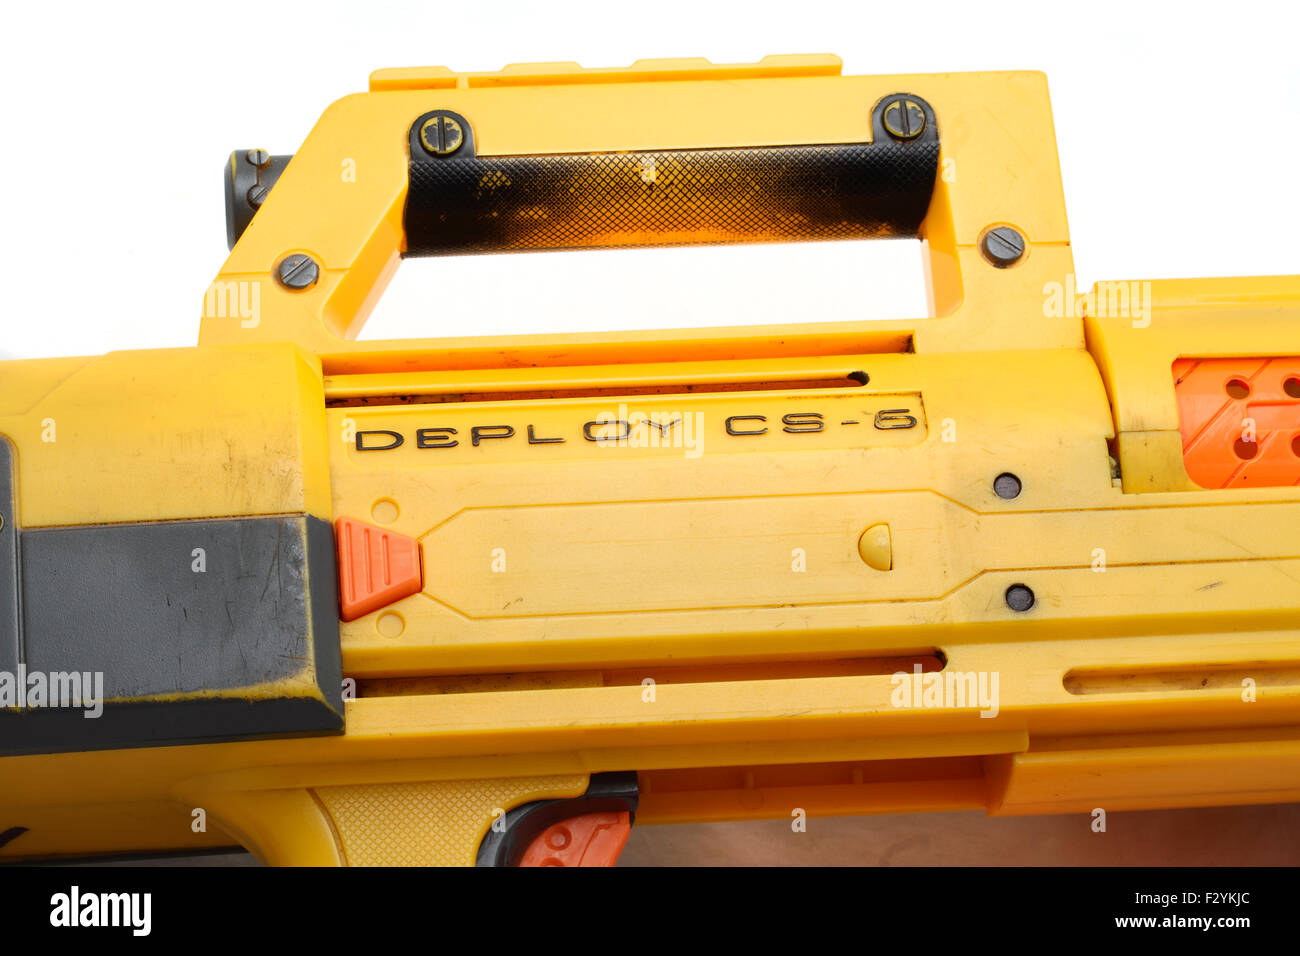 Nerf Gun - Deploy CS-6 A Nerf Blaster is a toy gun made by Hasbro that  fires foam darts, discs, or, in some cases, foam balls. T Stock Photo -  Alamy